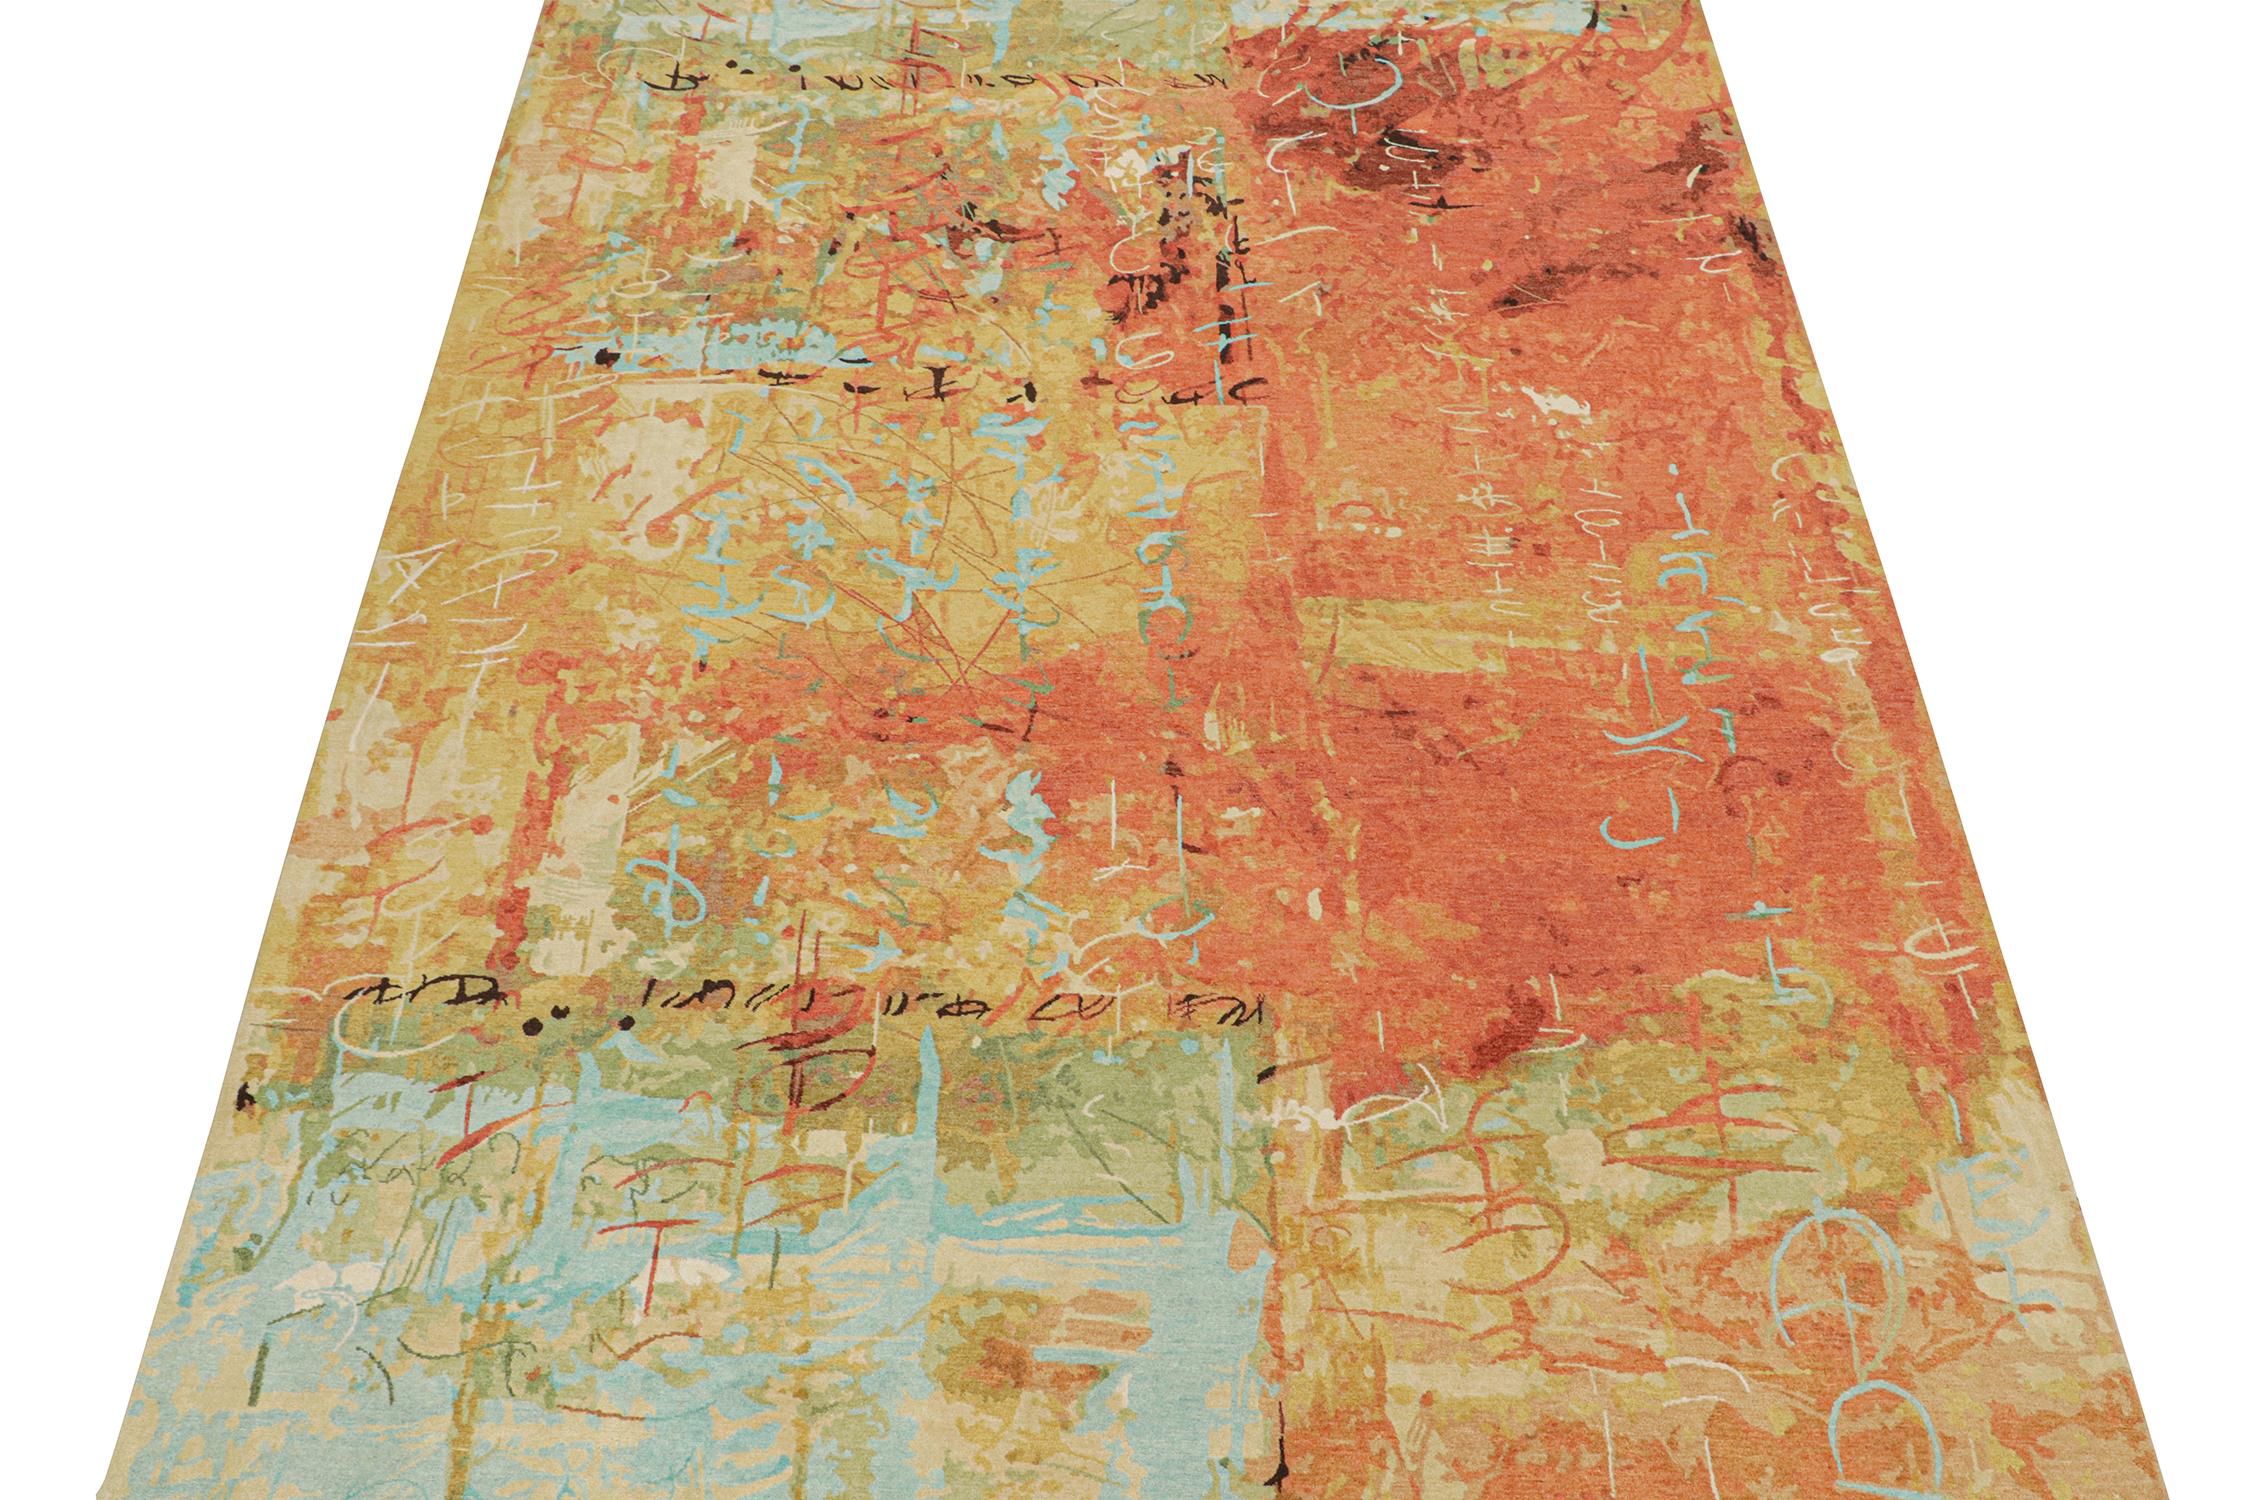 This 9x12 abstract rug is a bold new addition to Rug & Kilim’s Modern rug collection. Hand-knotted in wool and silk, its design is a take on expressionist sensibilities in the most exceptional high-end quality.

Further on the Design:

This art